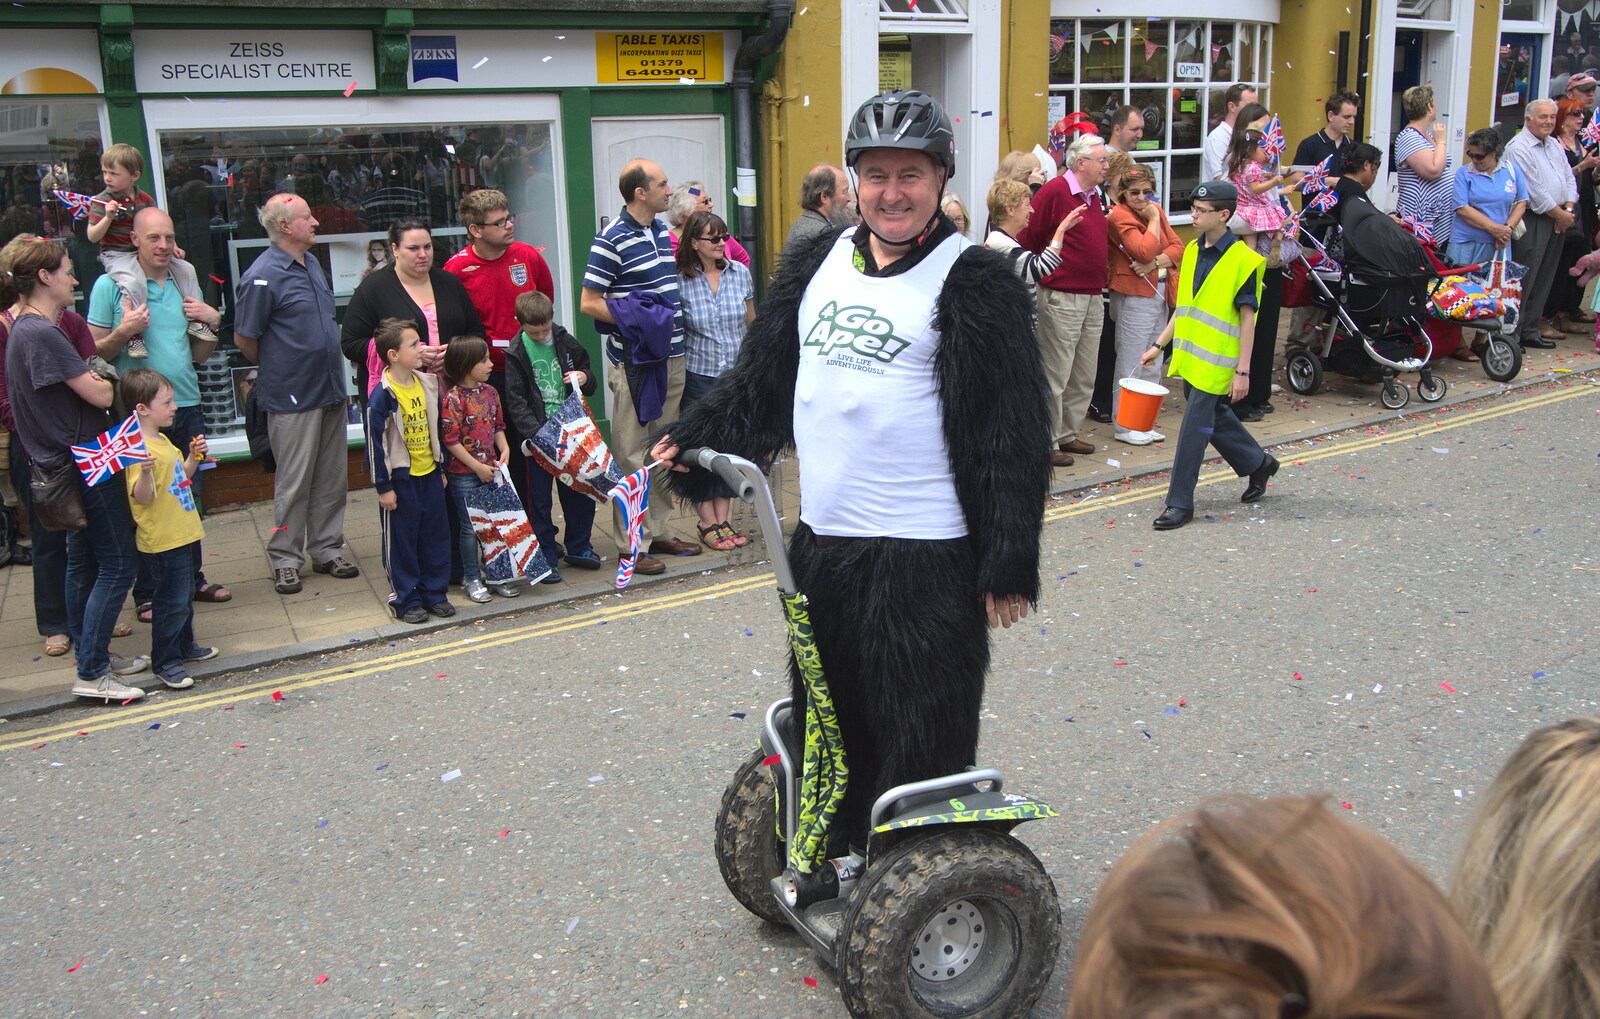 A gorilla on a Segway from Morris Dancing and a Carnival Procession, Diss, Norfolk - 17th June 2012